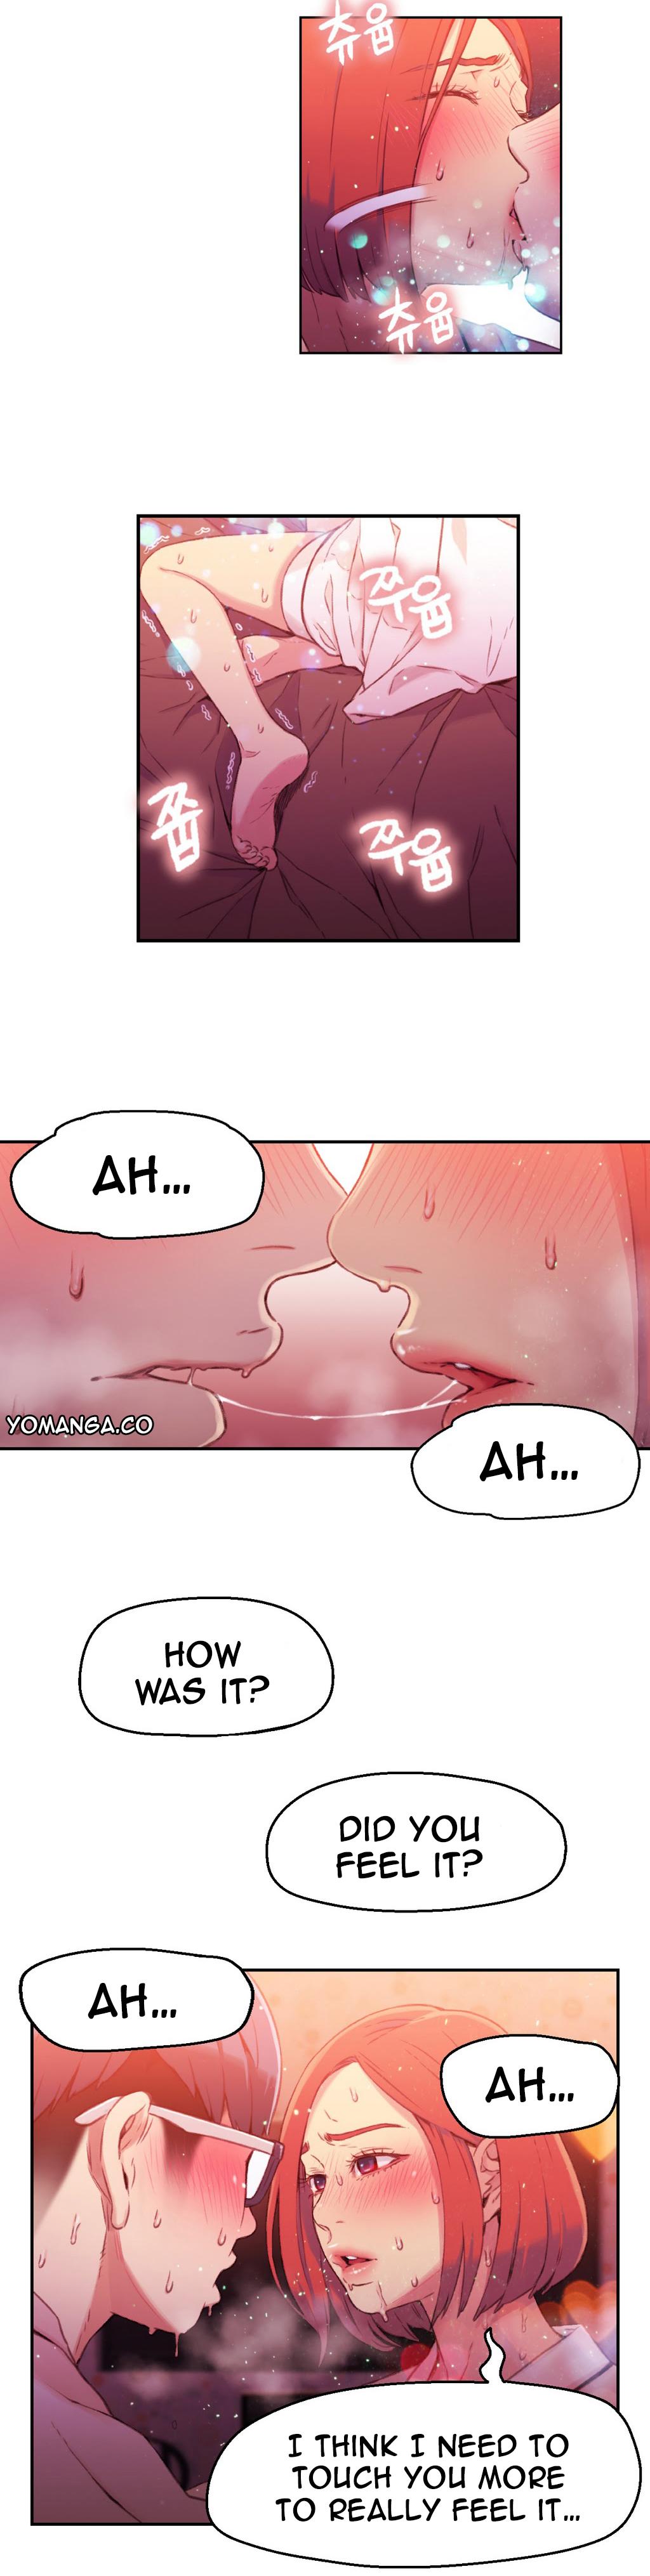 Glam Sweet Guy/He Does a Body Good Ch. 16-17 Alt - Page 12